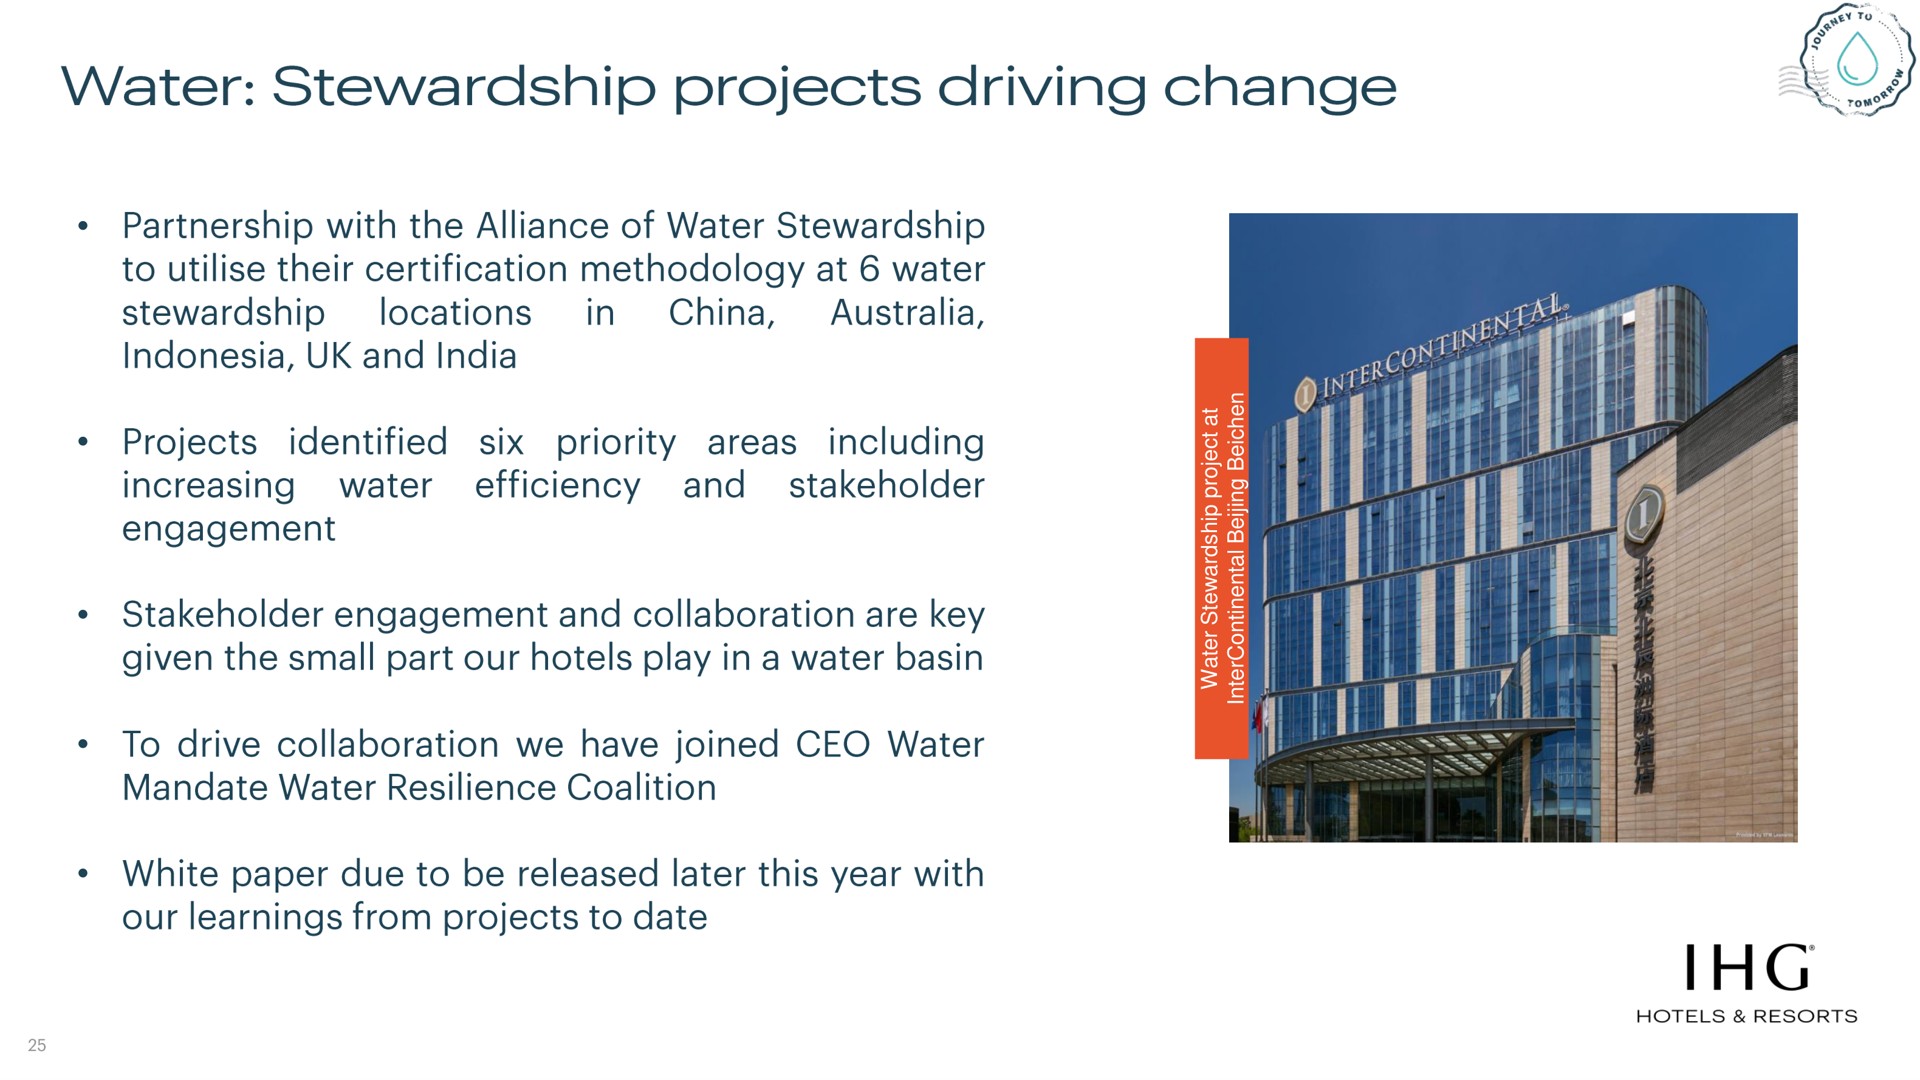 water stewardship projects driving change | IHG Hotels